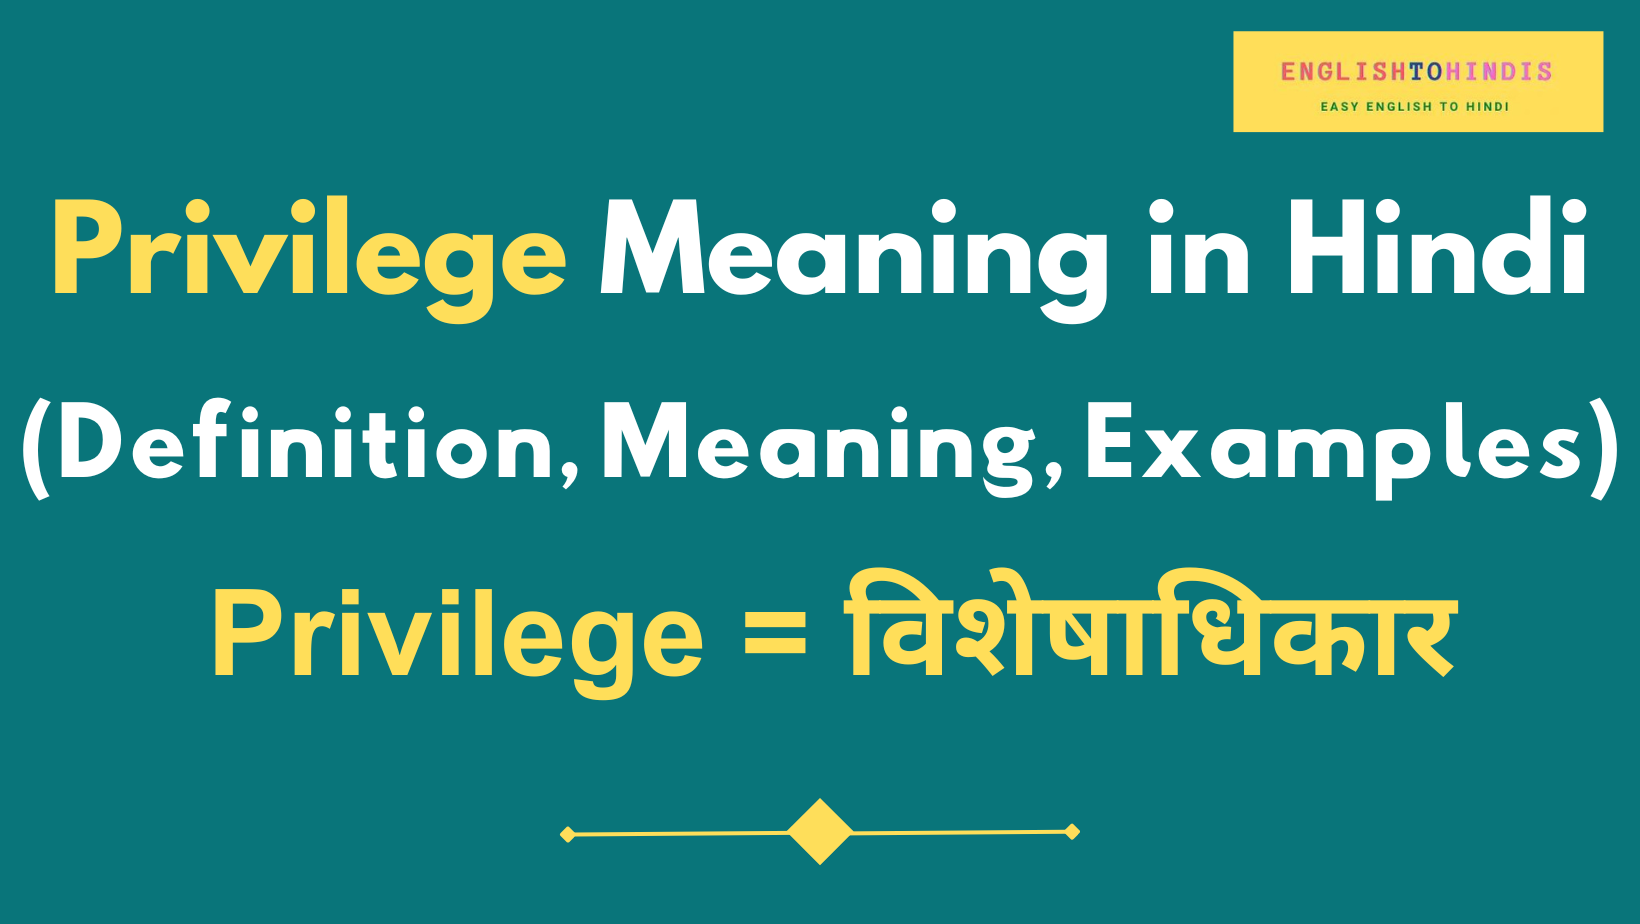 Privilege Meaning in Hindi